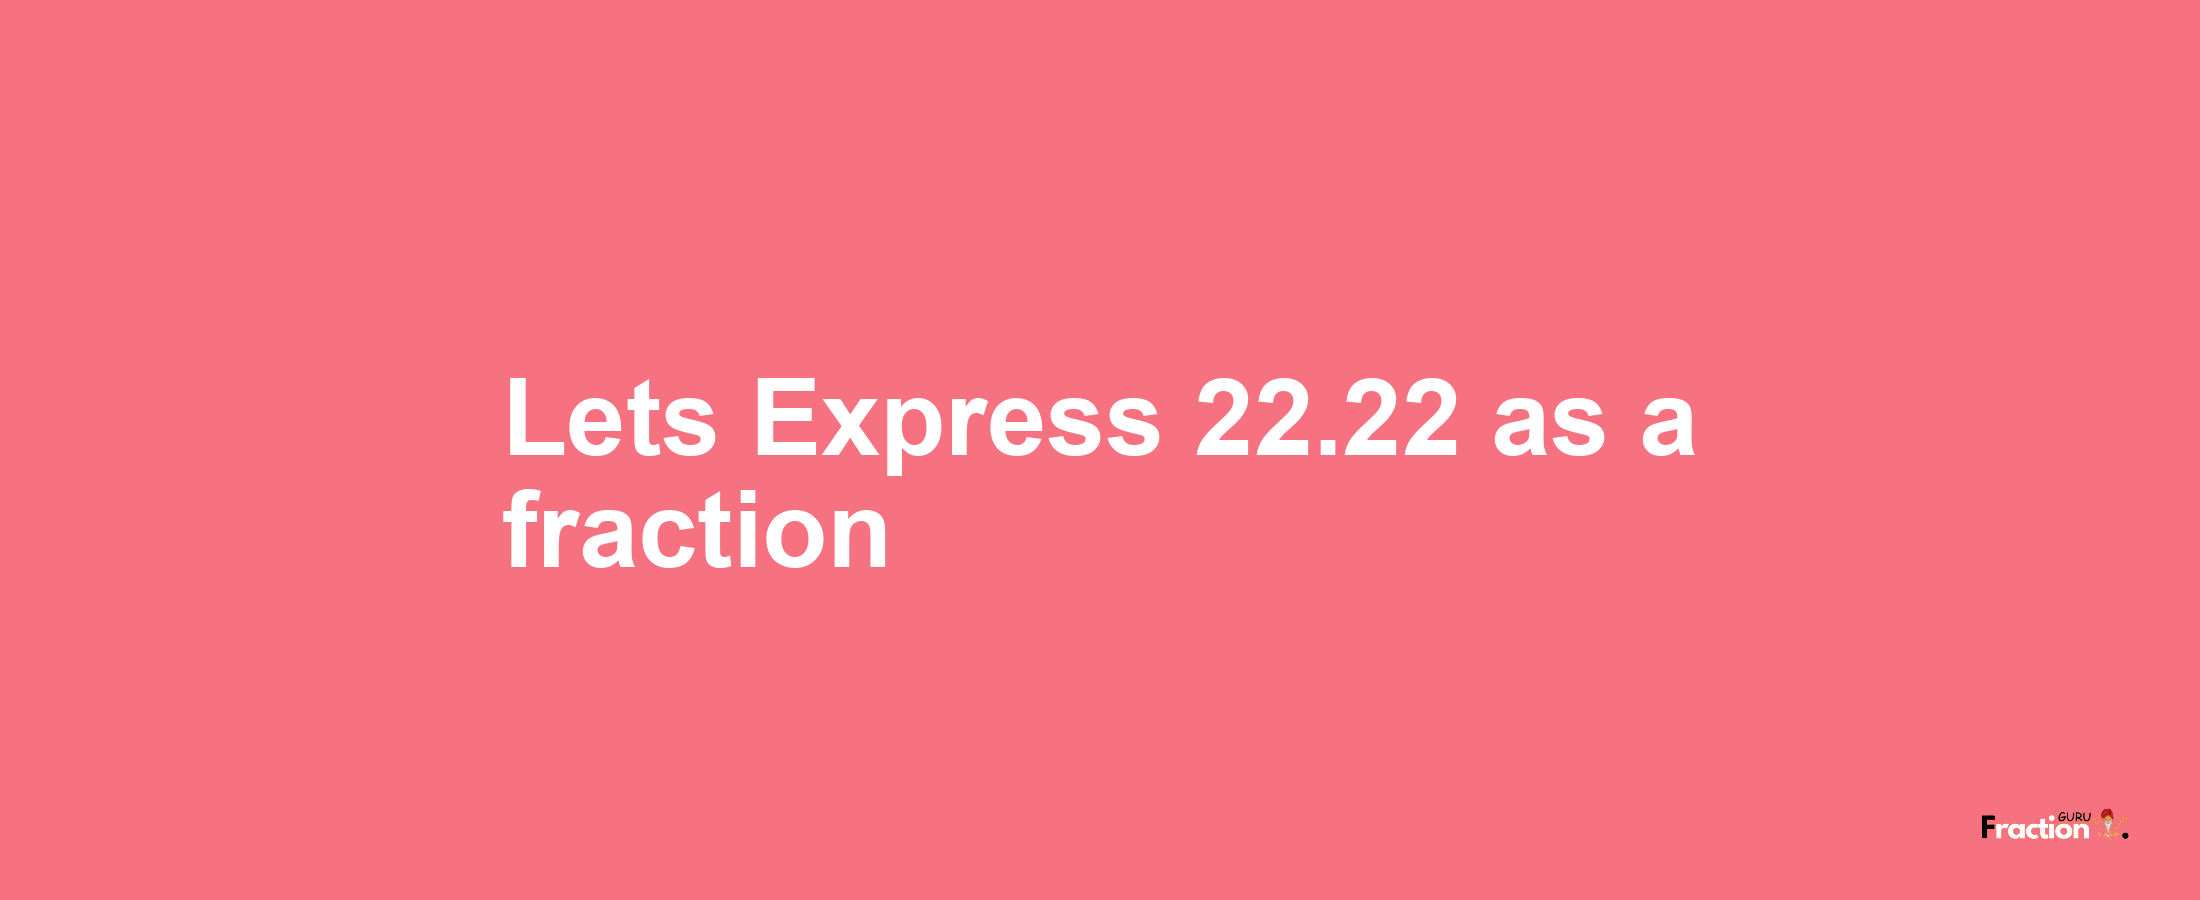 Lets Express 22.22 as afraction